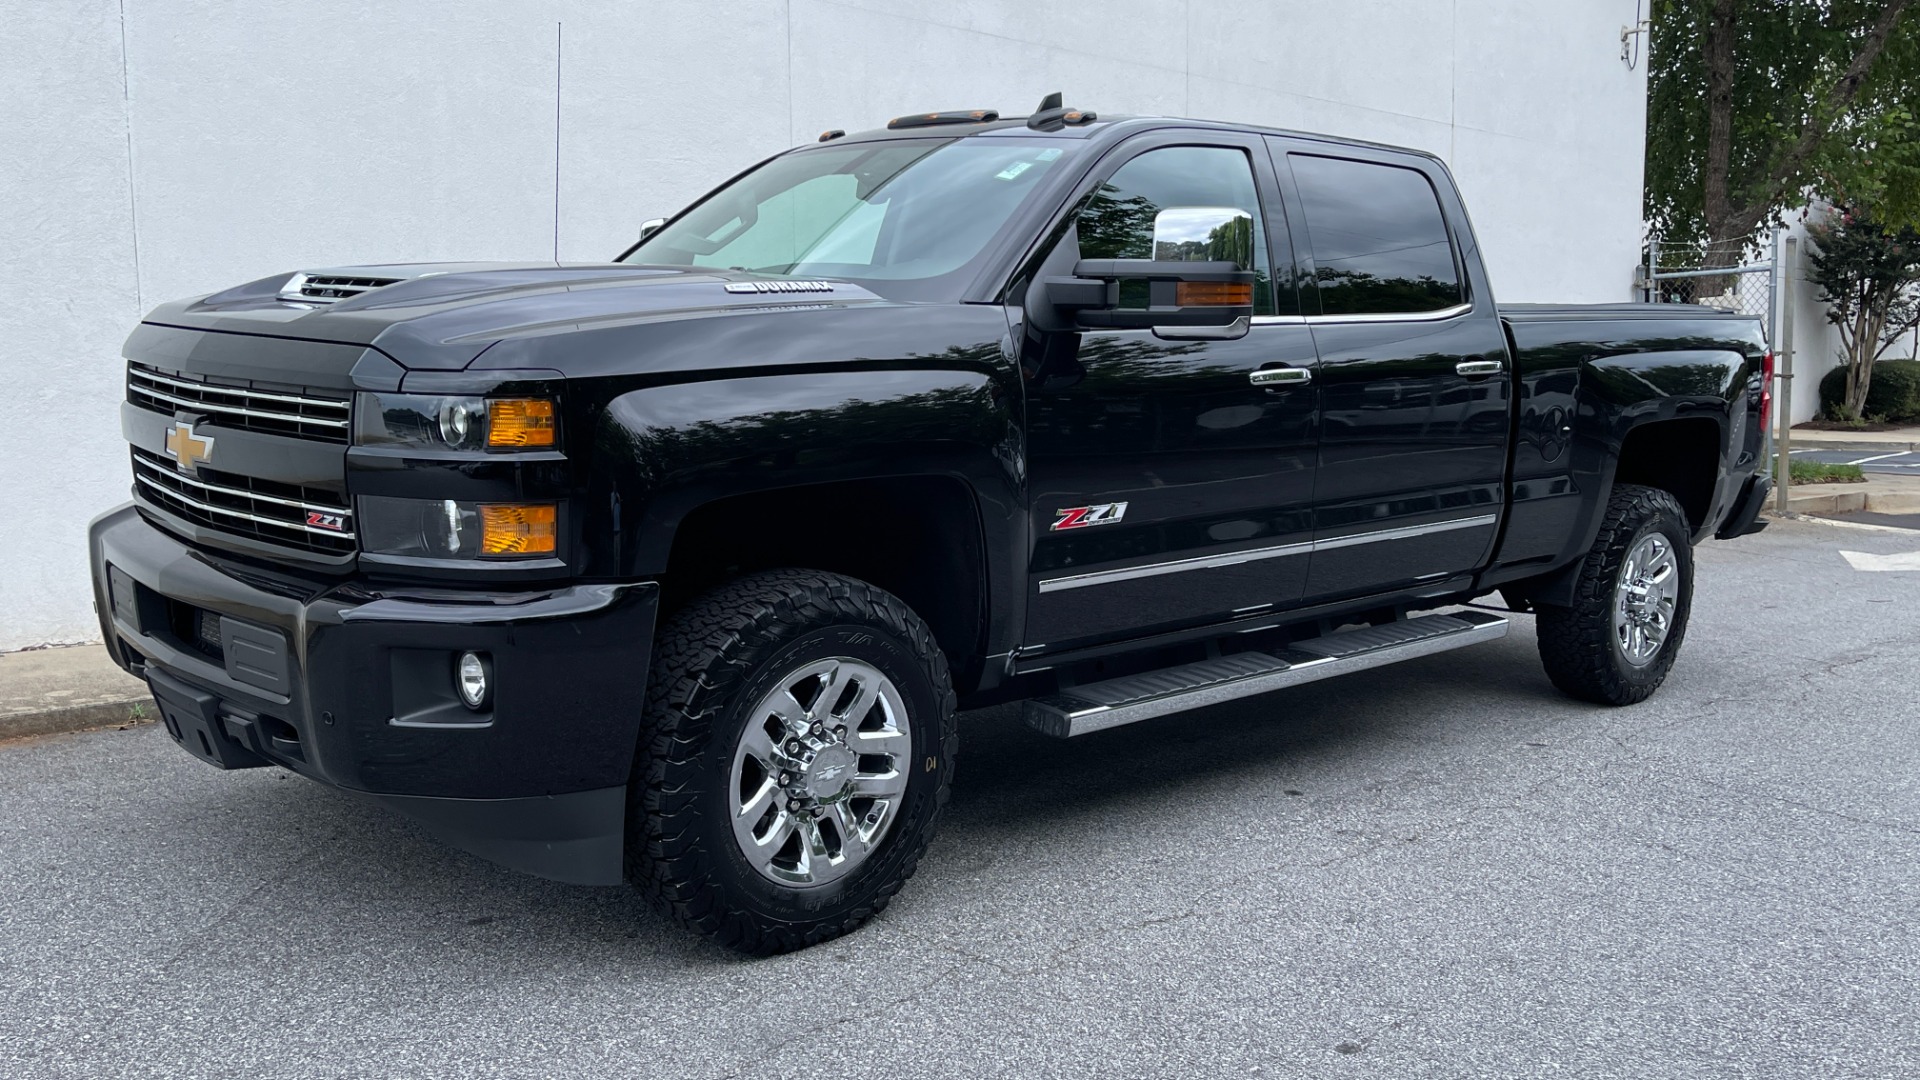 Used 2018 Chevrolet Silverado 3500HD LTZ / DURAMAX PLUS PACKAGE / SPORT EDITION / Z71 OFFROAD / SUNROOF / LEATHE for sale $60,861 at Formula Imports in Charlotte NC 28227 3